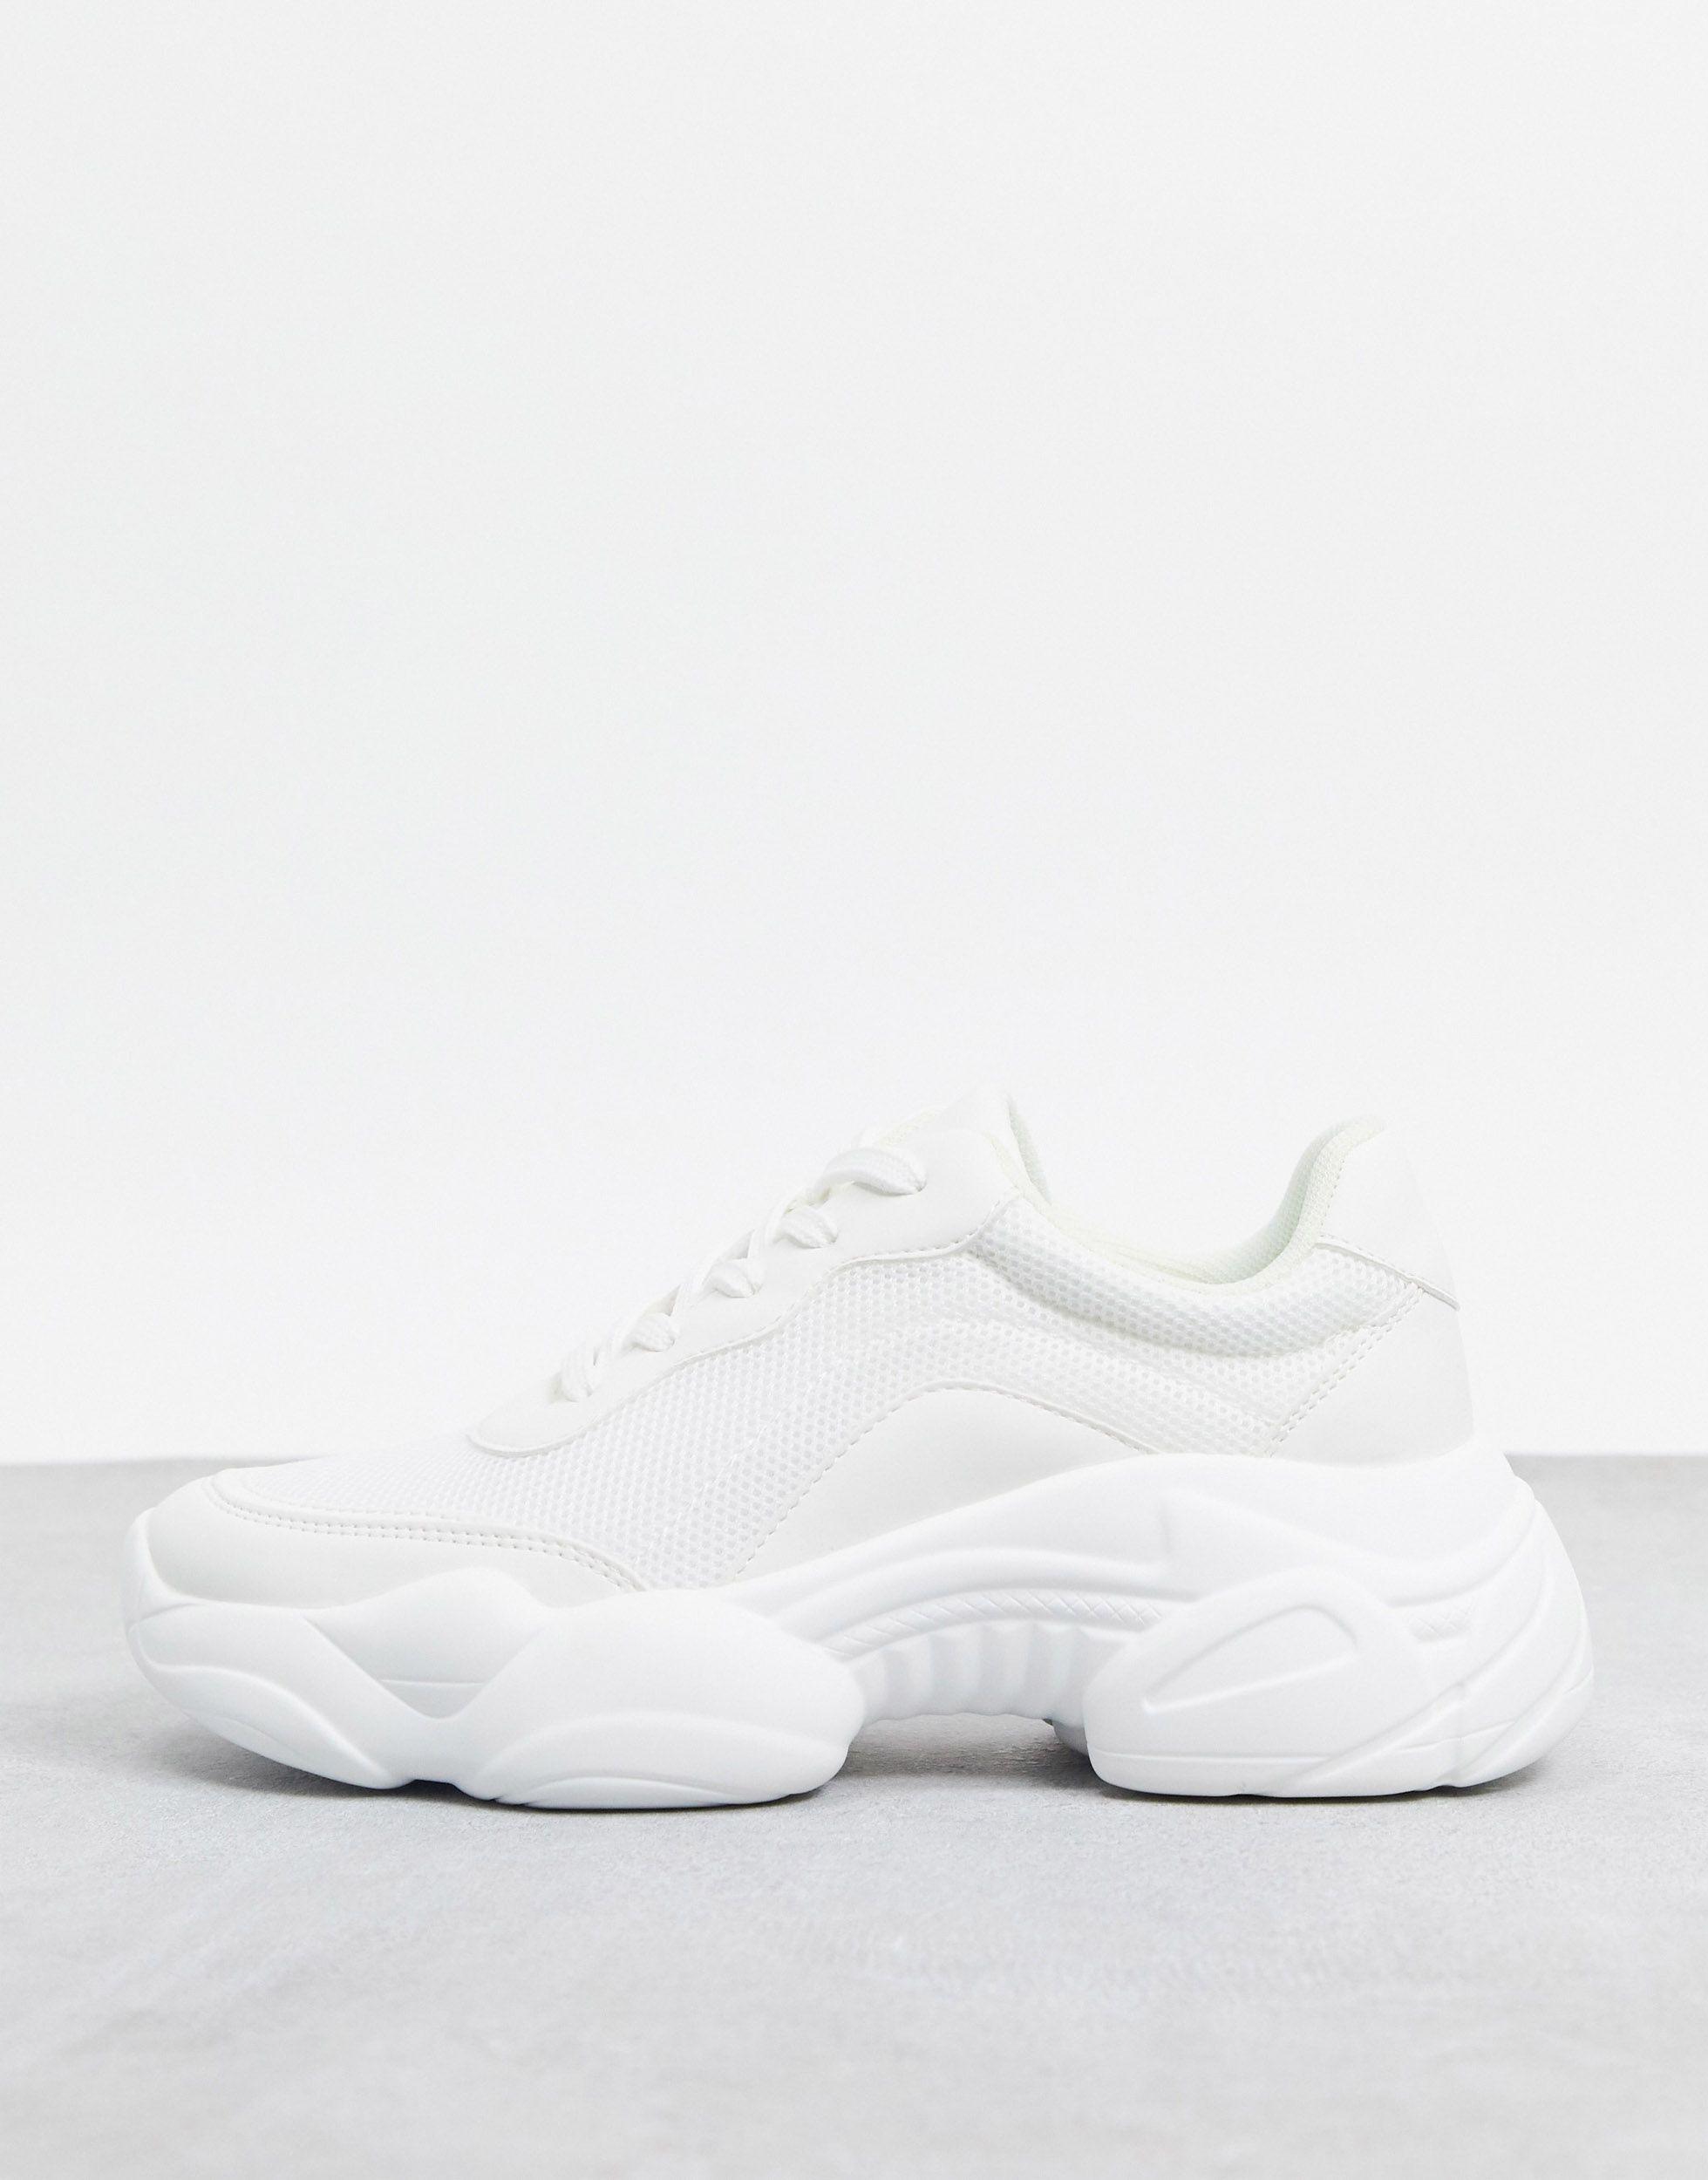 ASOS Destined Chunky Sneakers in White 